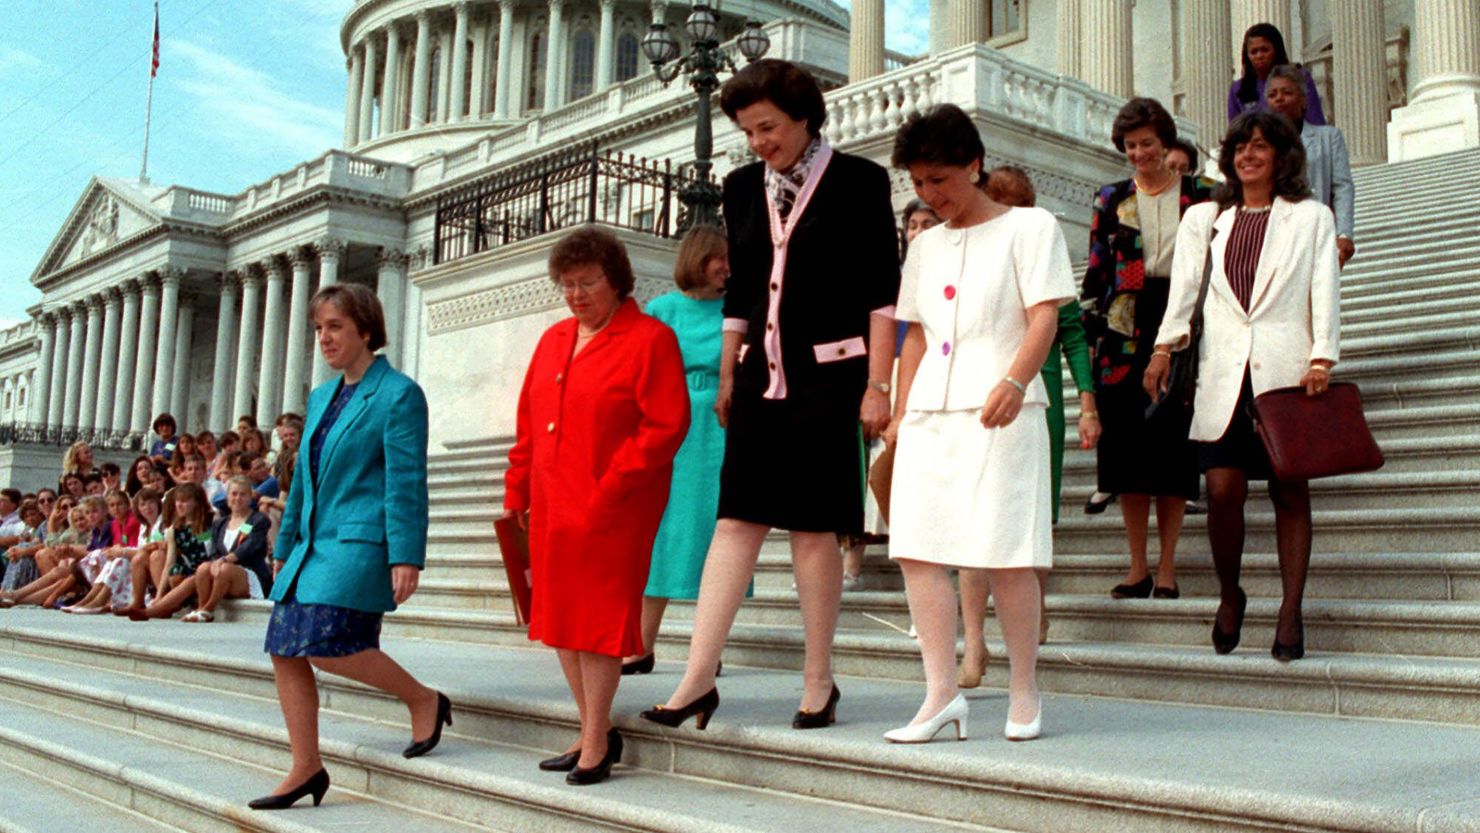 From left: Sens. Patty Murray, Barbara Mikulski, Dianne Feinstein and Barbara Boxer are seen with others on the steps of the US Capitol in Washington, DC, on July 21, 1993.